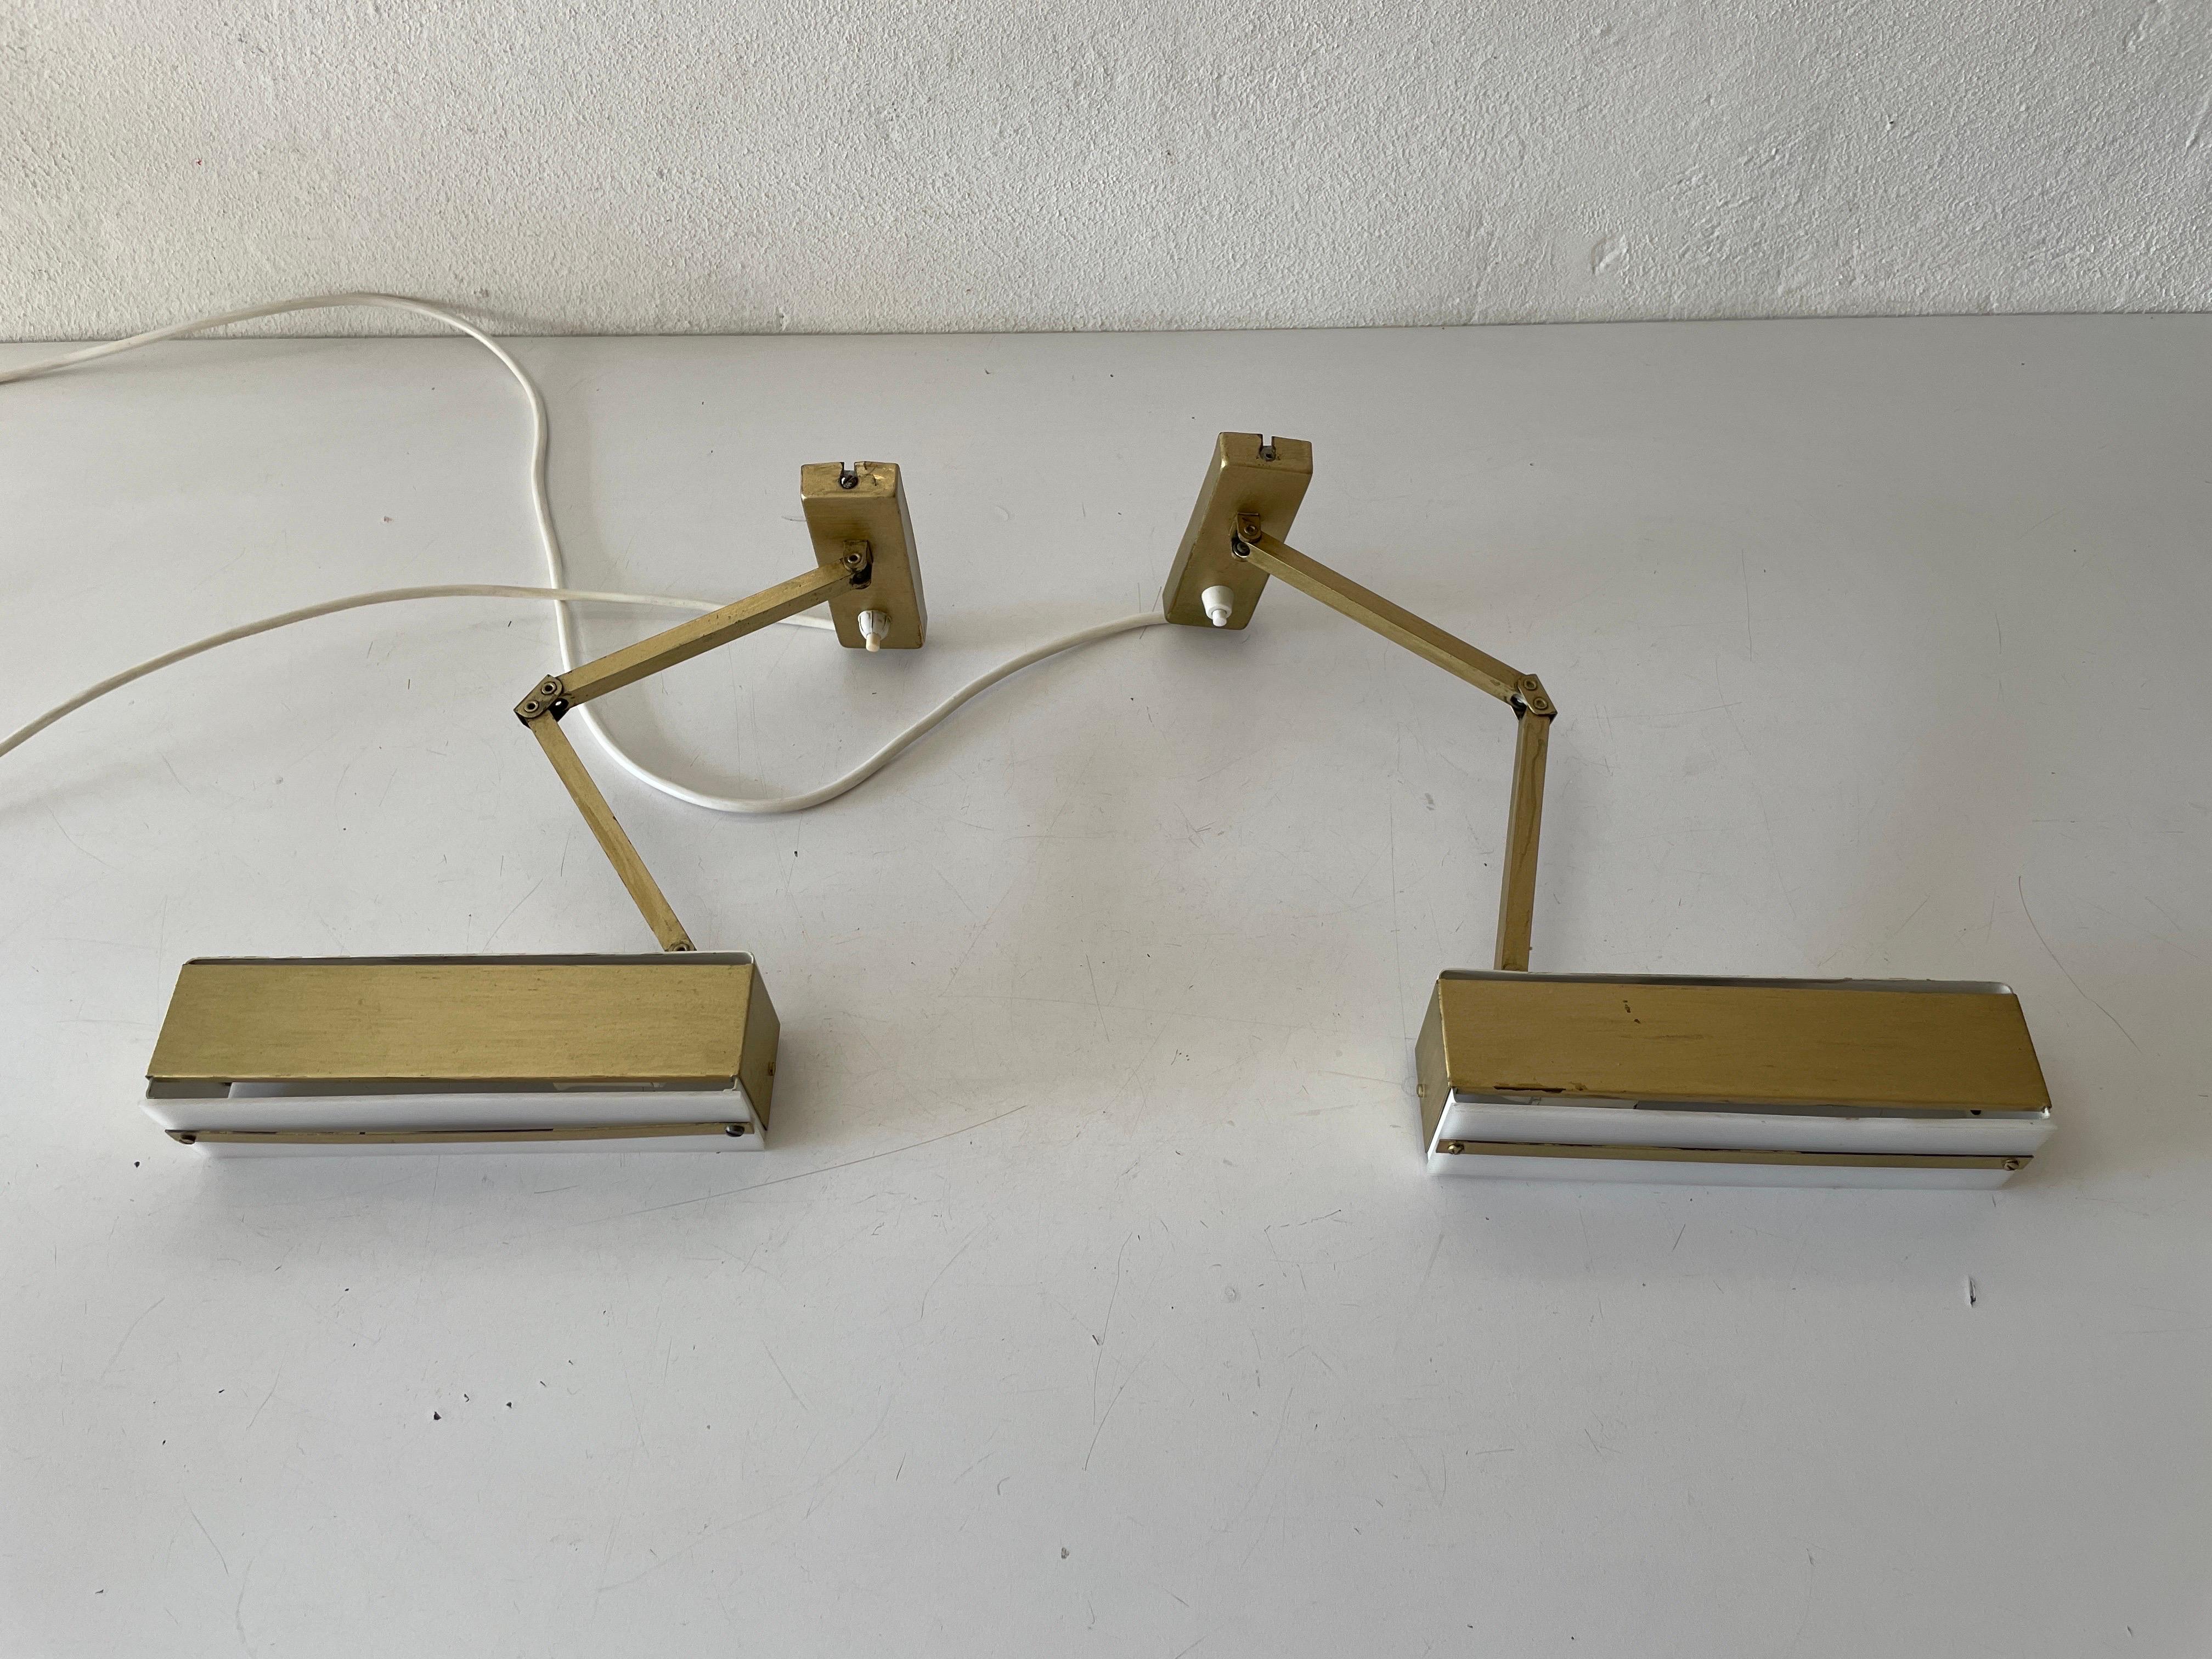 Mid-century Gold Metal and White Plexiglass Pair of Sconces with Adjustable Arms by Paul Neuhaus Leuchten, 1950s, Germany

Adjustable Reflectors

Very elegant and Minimalist wall lamps.
There are two switch on-off on the base 

Lamps are in